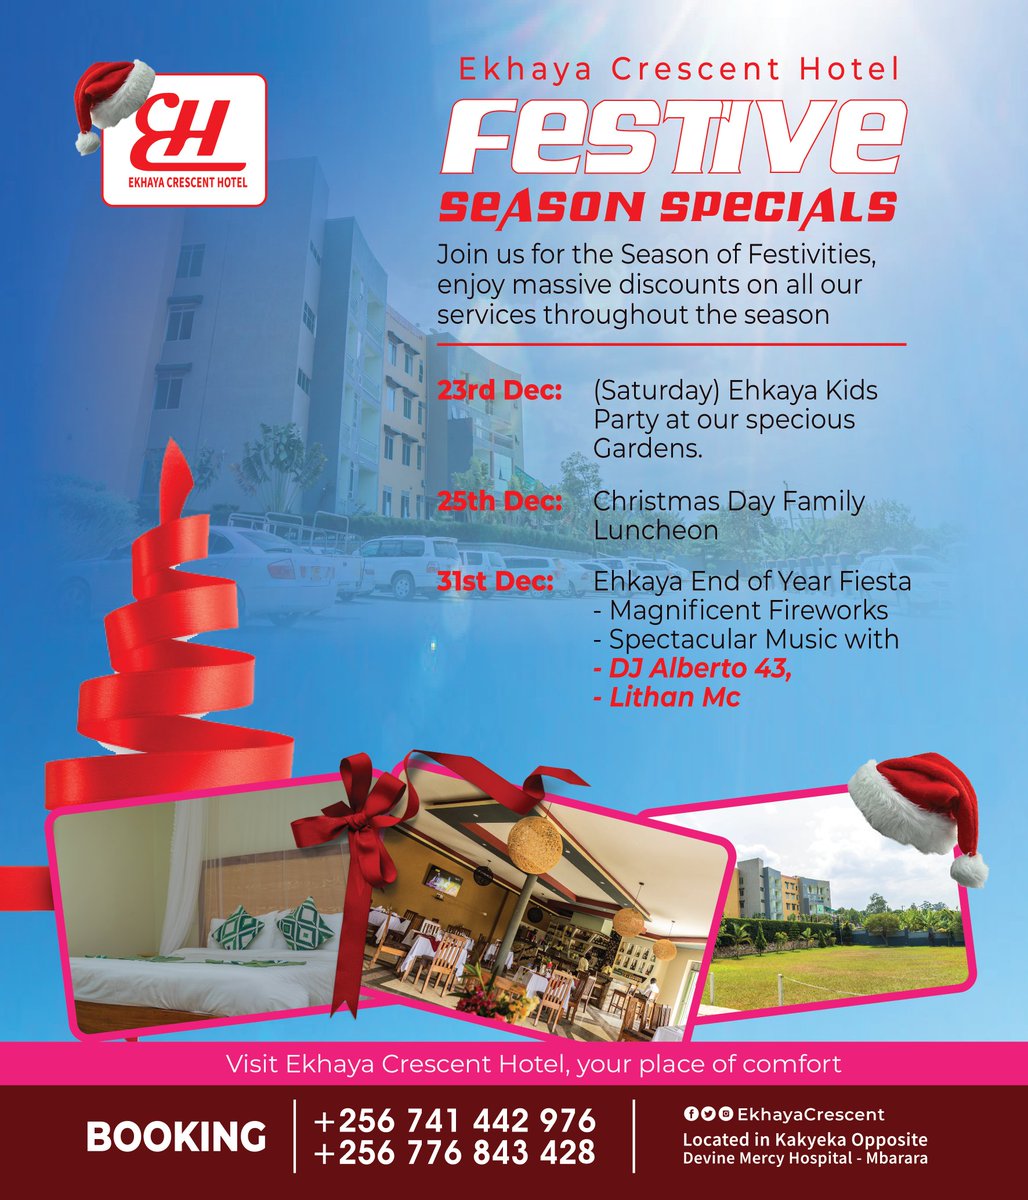 FESTIVE SEASON SPECIAL ARE HERE. 
Join us for the season of festivities & enjoy massive discounts on all out services throughout the season. 
#FestiveSeason #FestiveGetTogether 
#accomodation #comfortfood #kidsgifts #Food